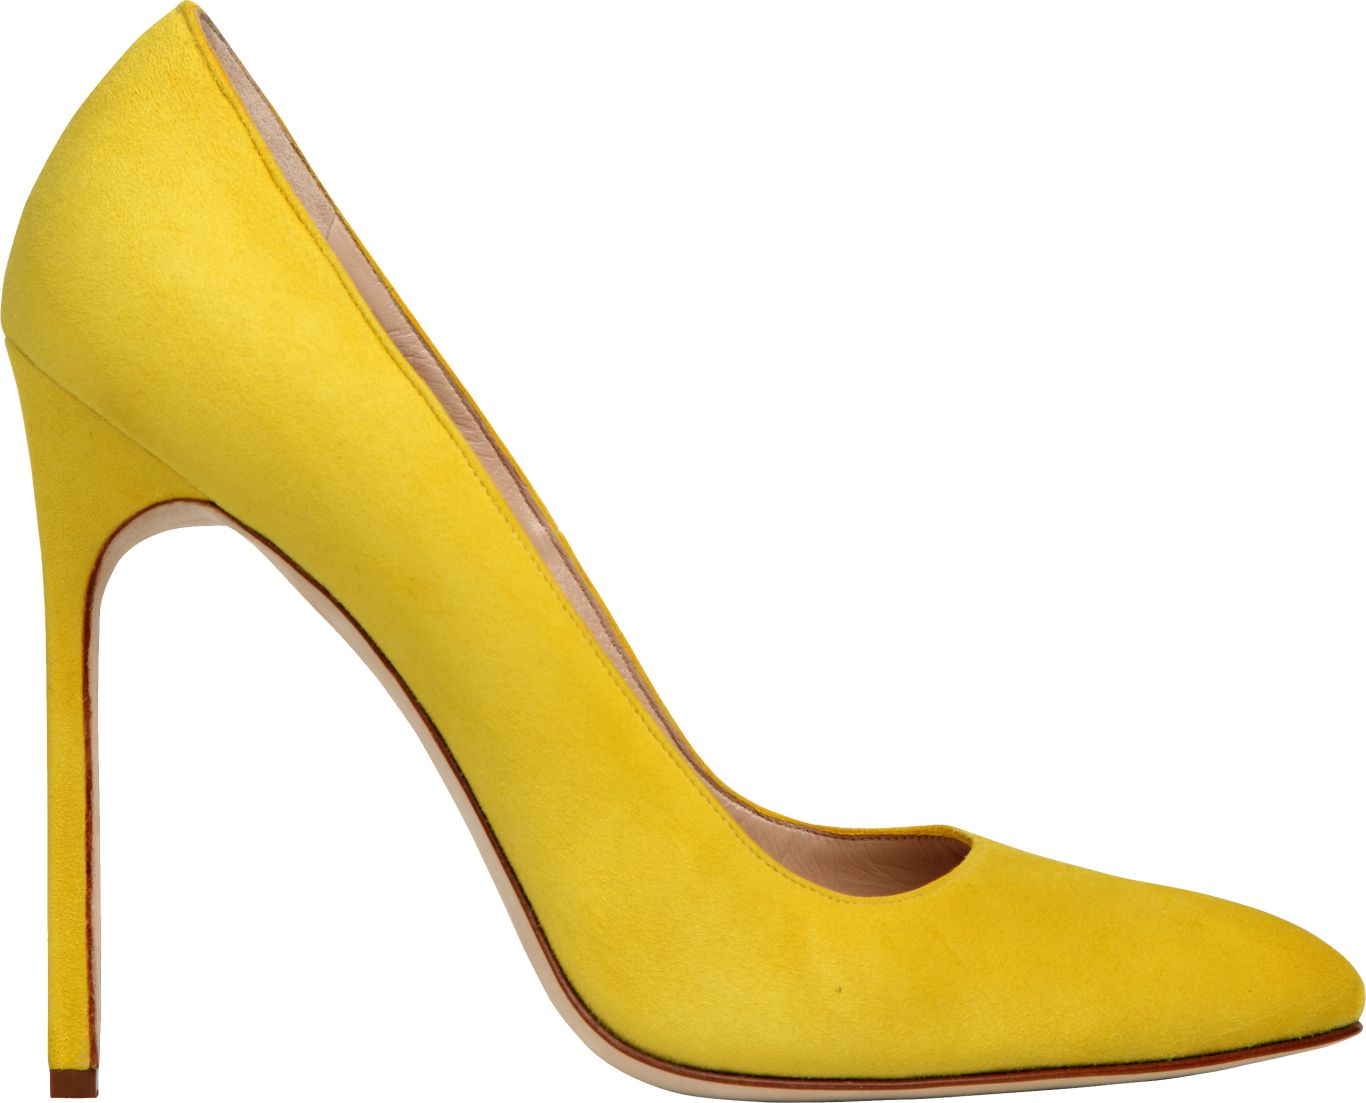 Women shoes PNG image    图片编号:7452